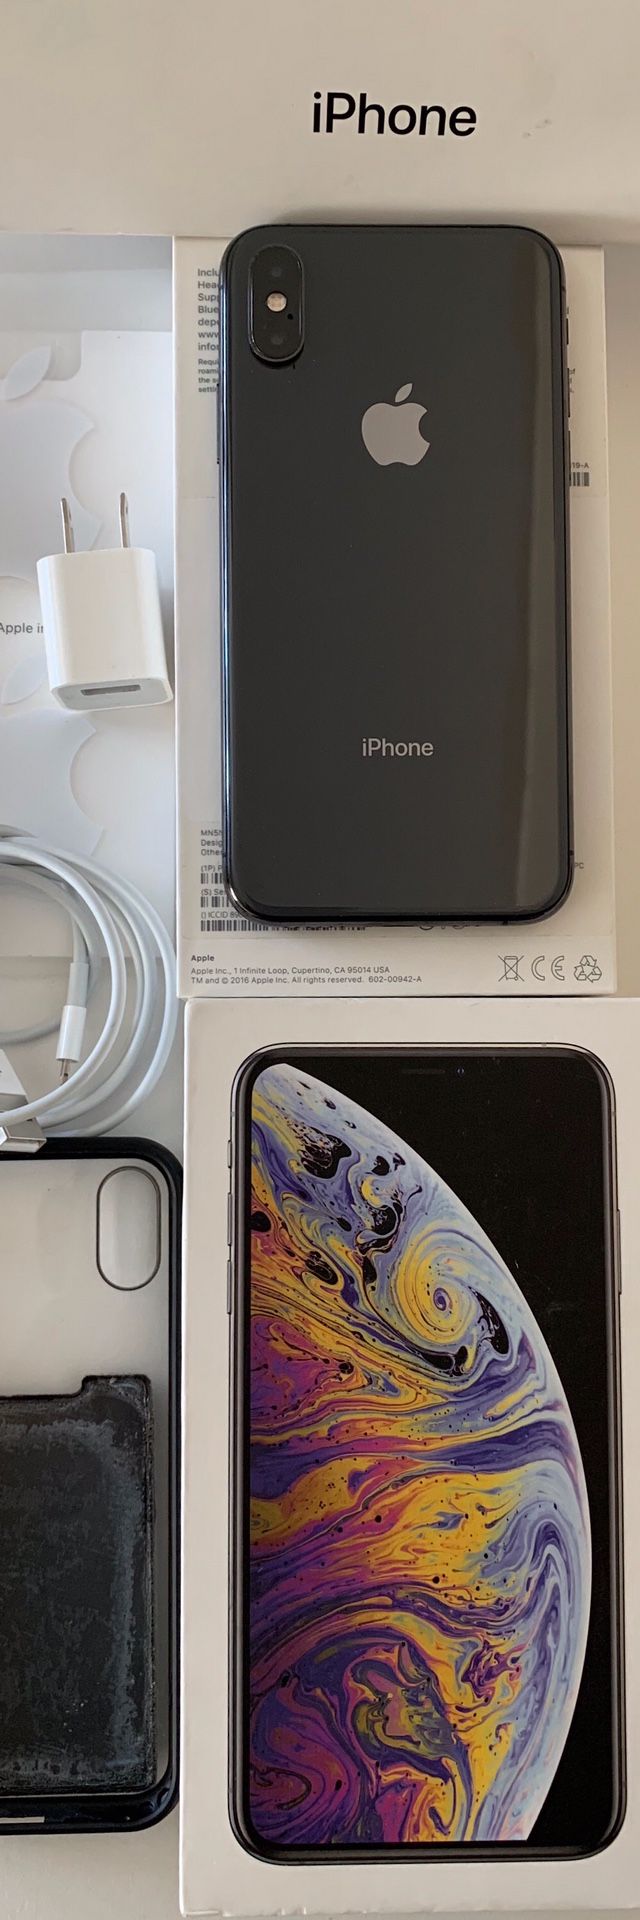 🔥IPHONE XS 64GB UNLOCKED WORKS W/ANY CELLPHONE CARRIER WE CAN MEET AT ANY CELLPHONE STORE VERIFY EVERYTHING WORKS💯%👍🏼